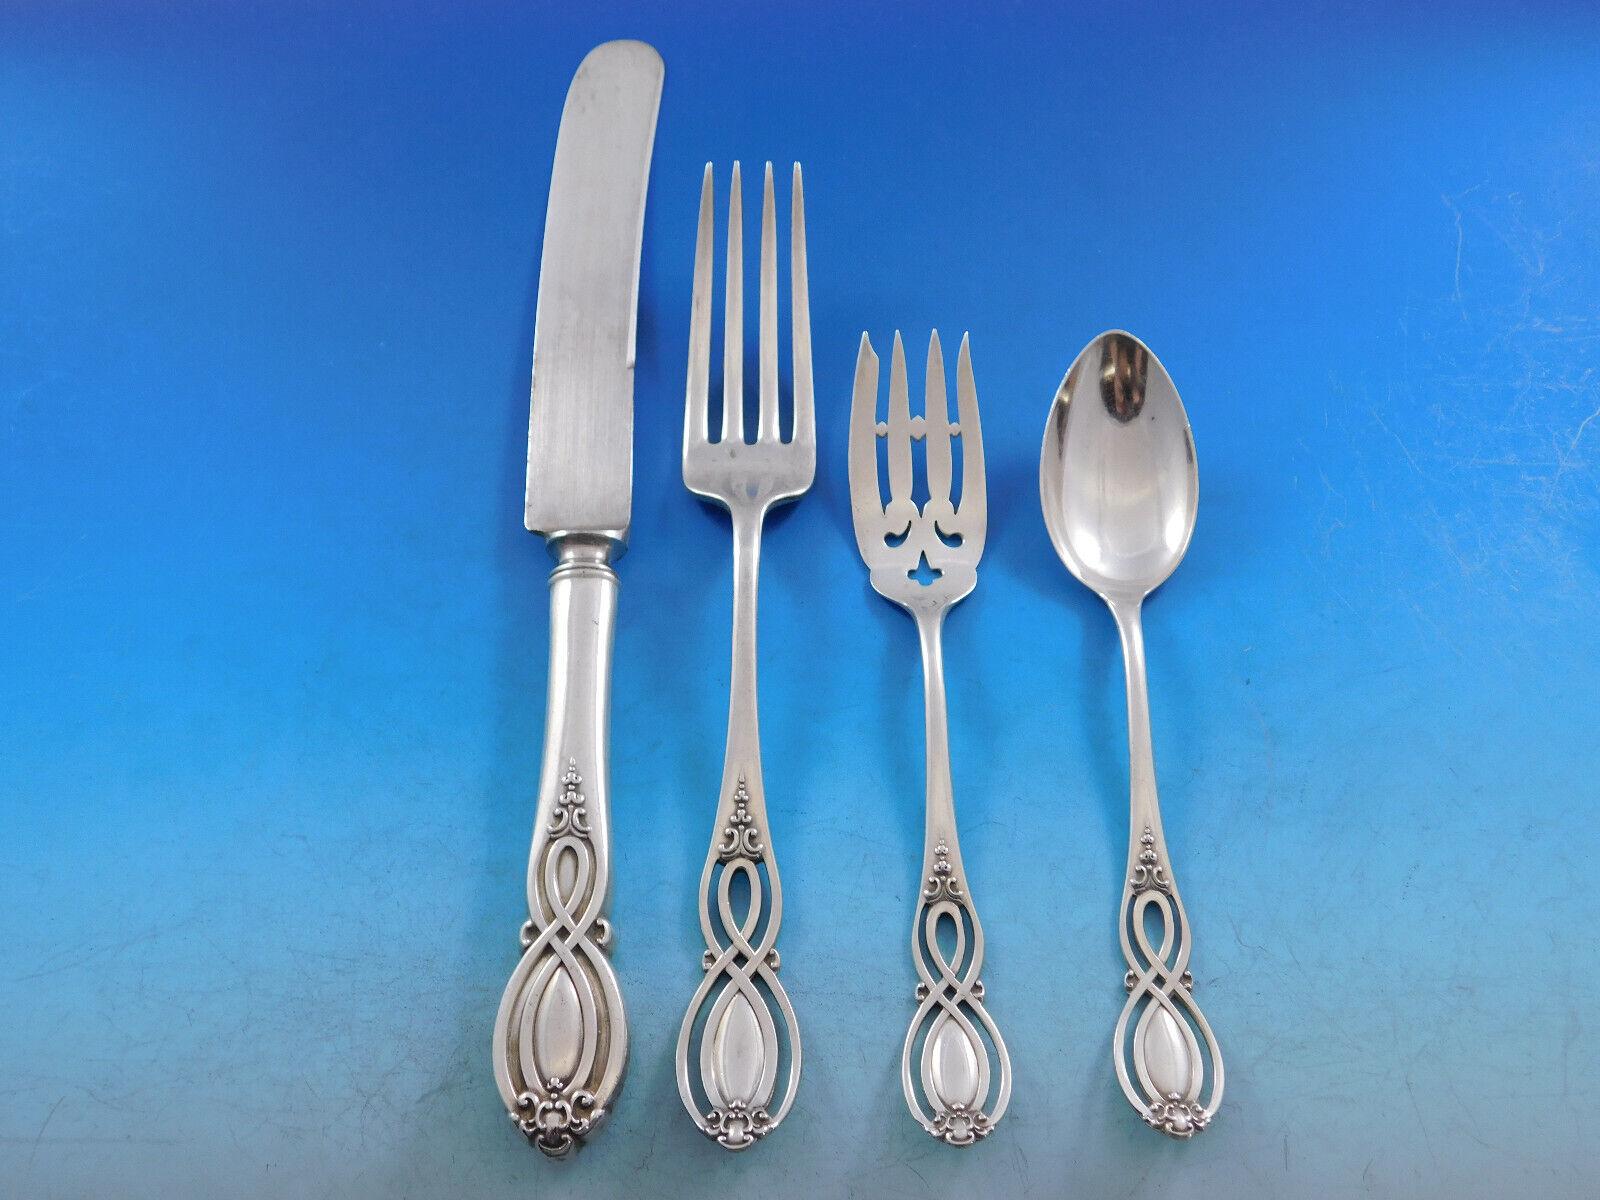 Rare Chippendale Old by Alvin, circa 1900, Sterling Silver Flatware set - 46 pieces. This pattern features a unique pierced handle. This set includes:

6 Dinner Size Knives w/blunt plated blades, 9 7/8